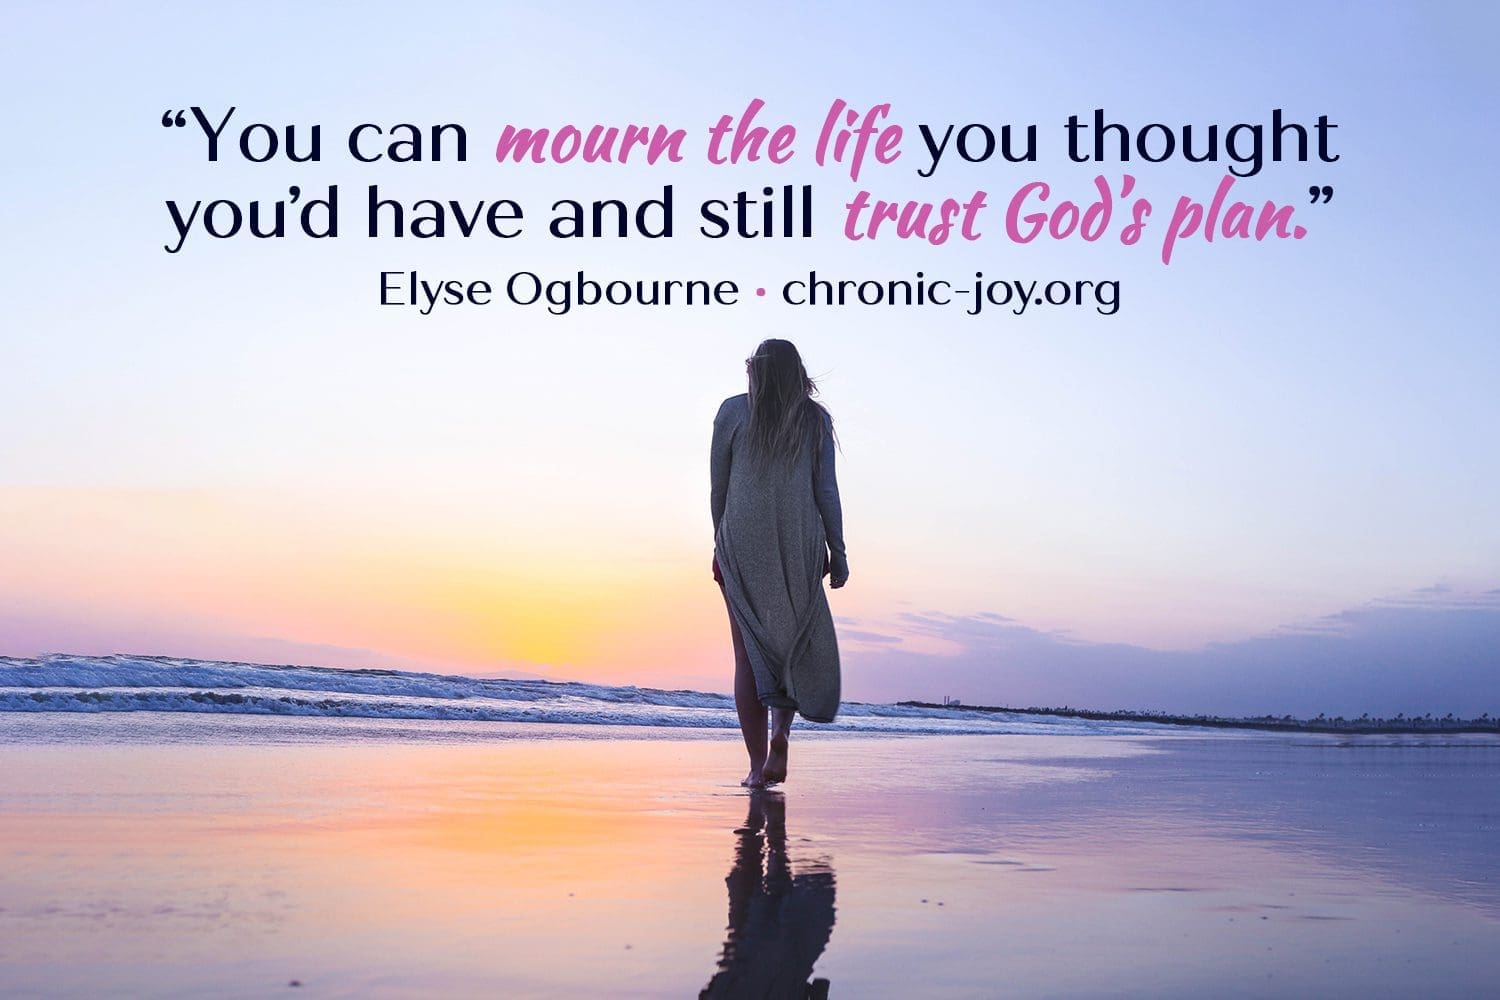 “You can mourn the life you thought you’d have and still trust God’s plan.” Elyse Ogbourne